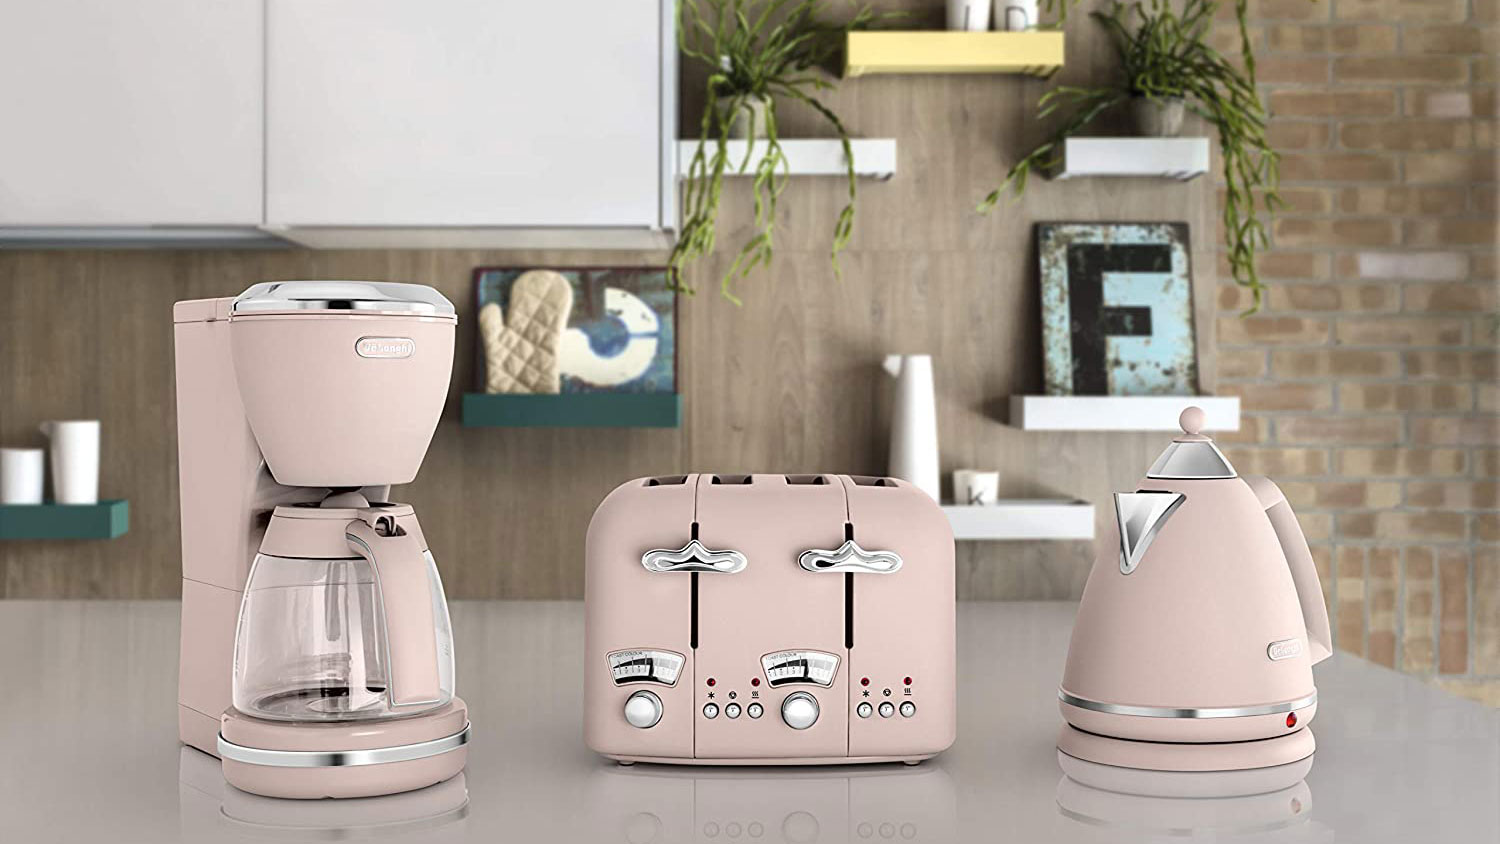 This millennial pink coffee machine is a kitchen must-have